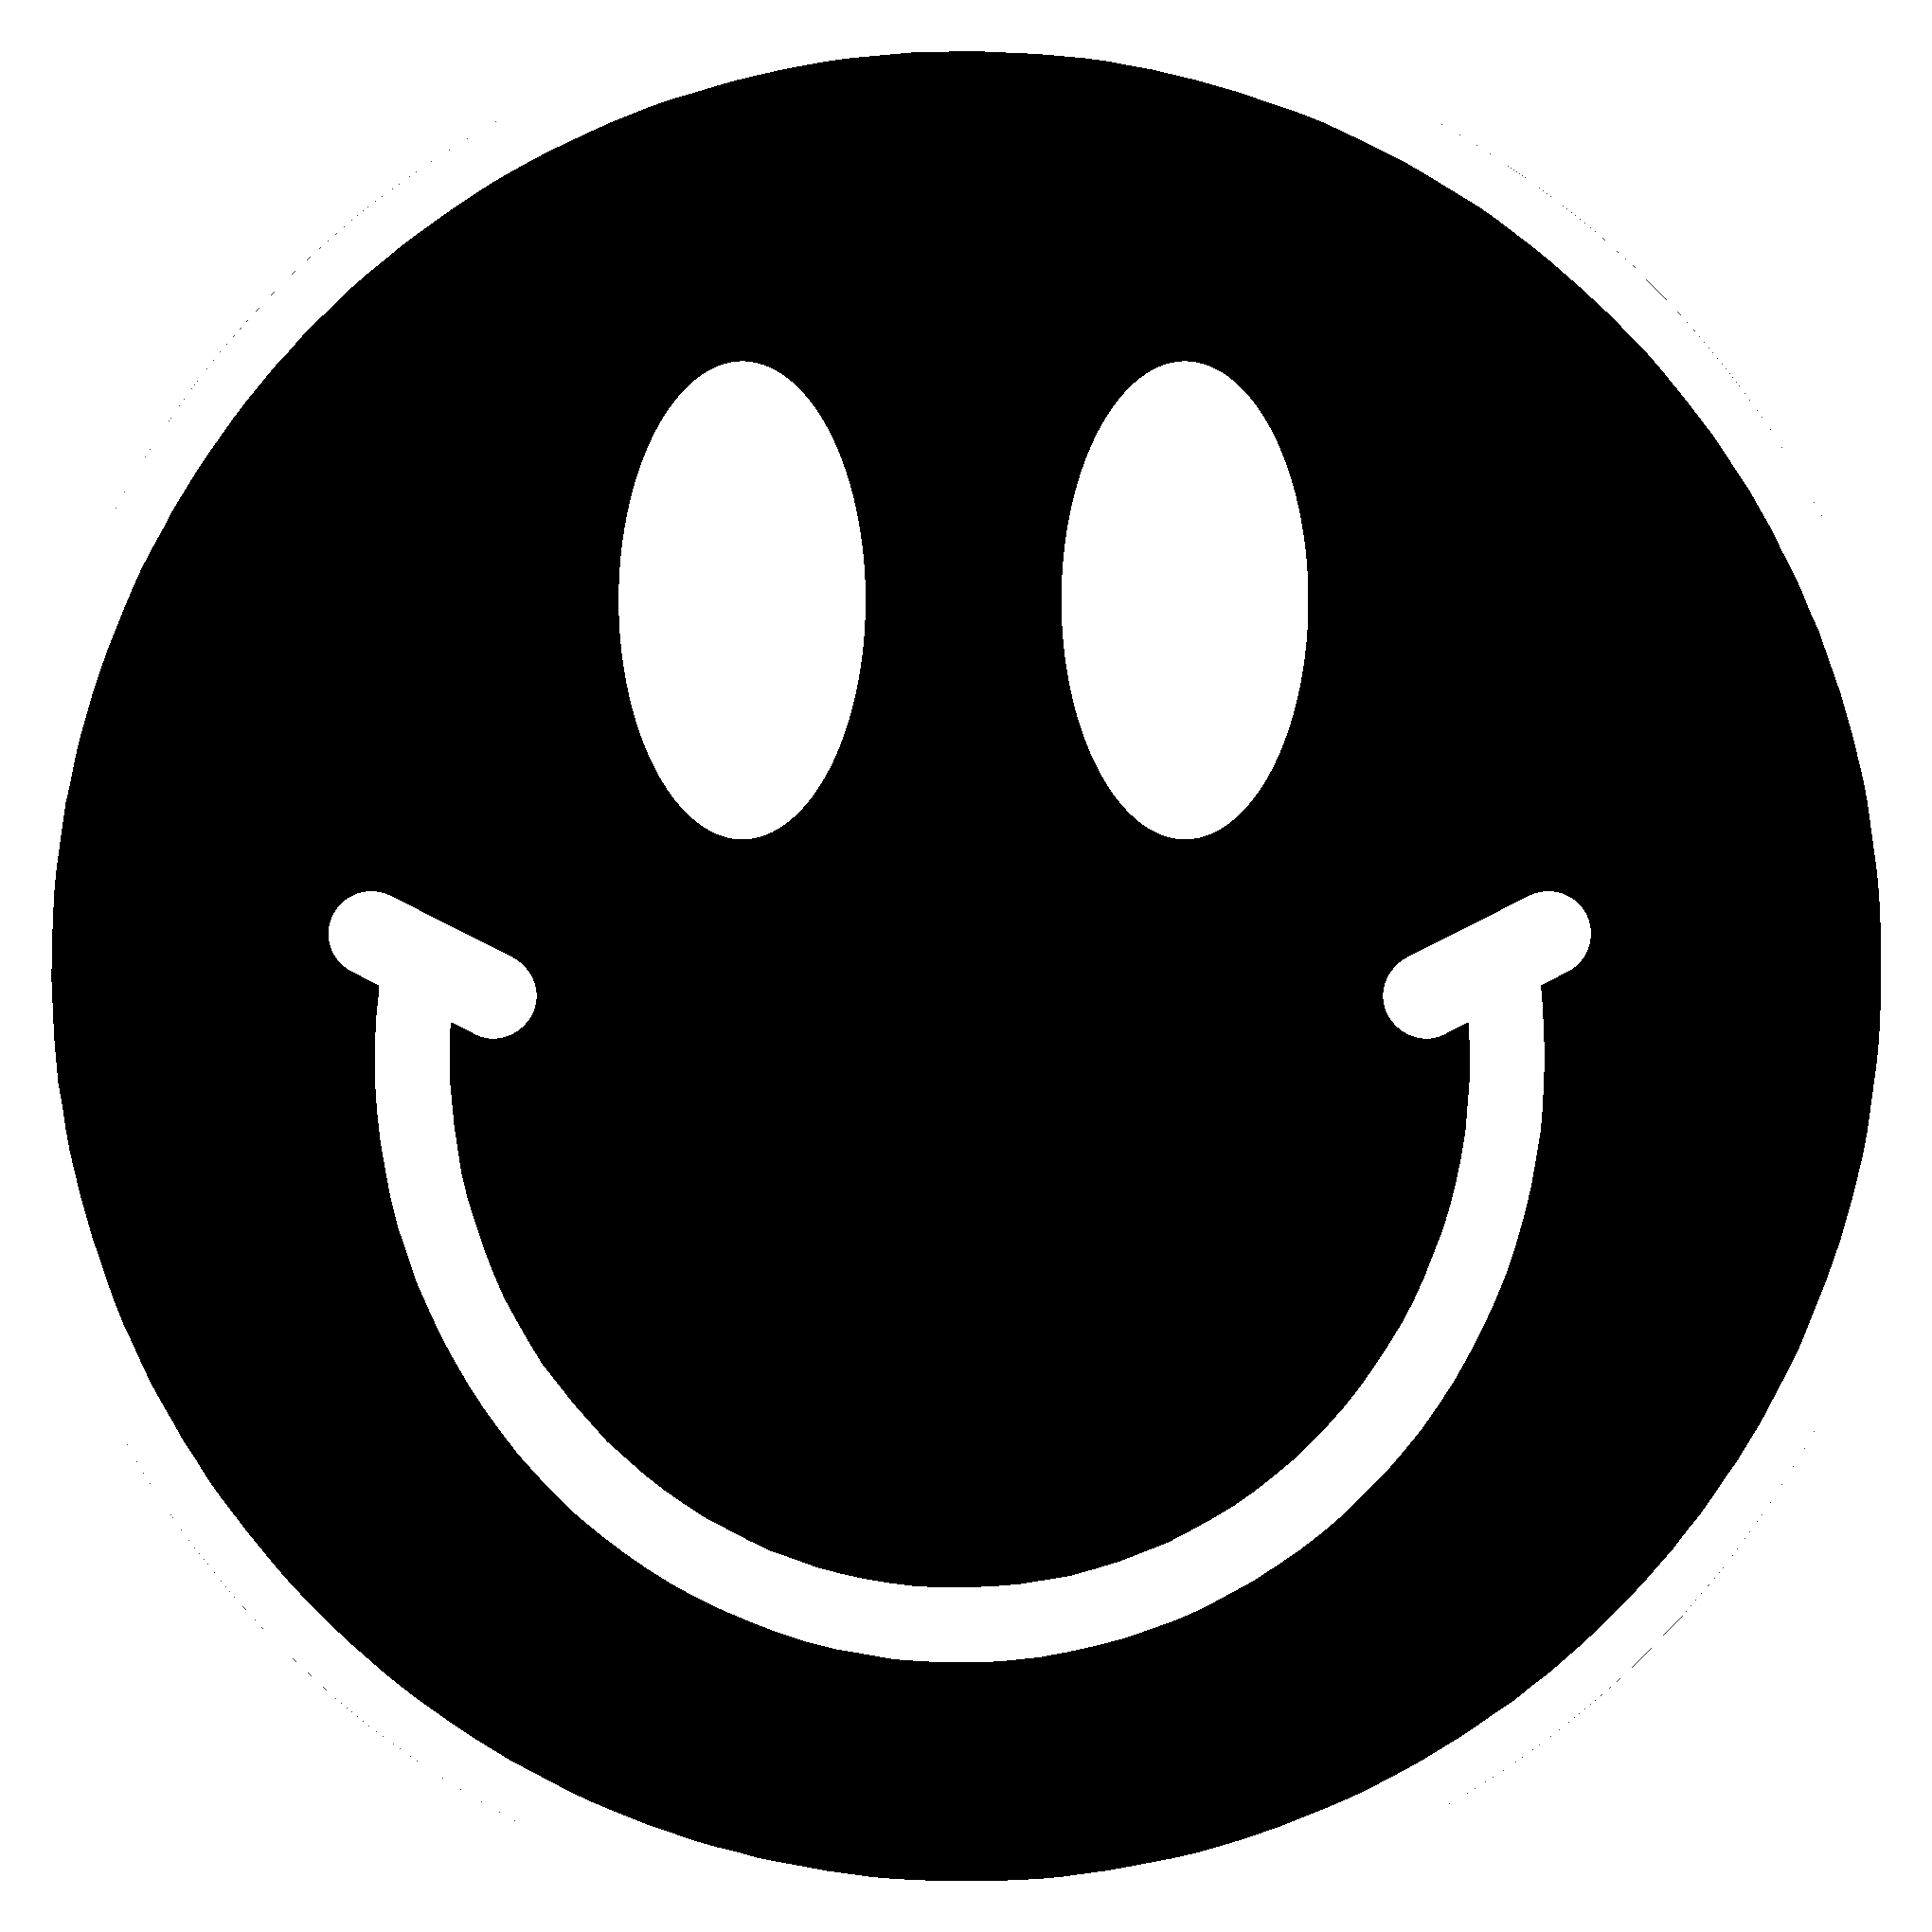 Smiley Black and white Emoticon Clip art - Smiley Face Black And White ...